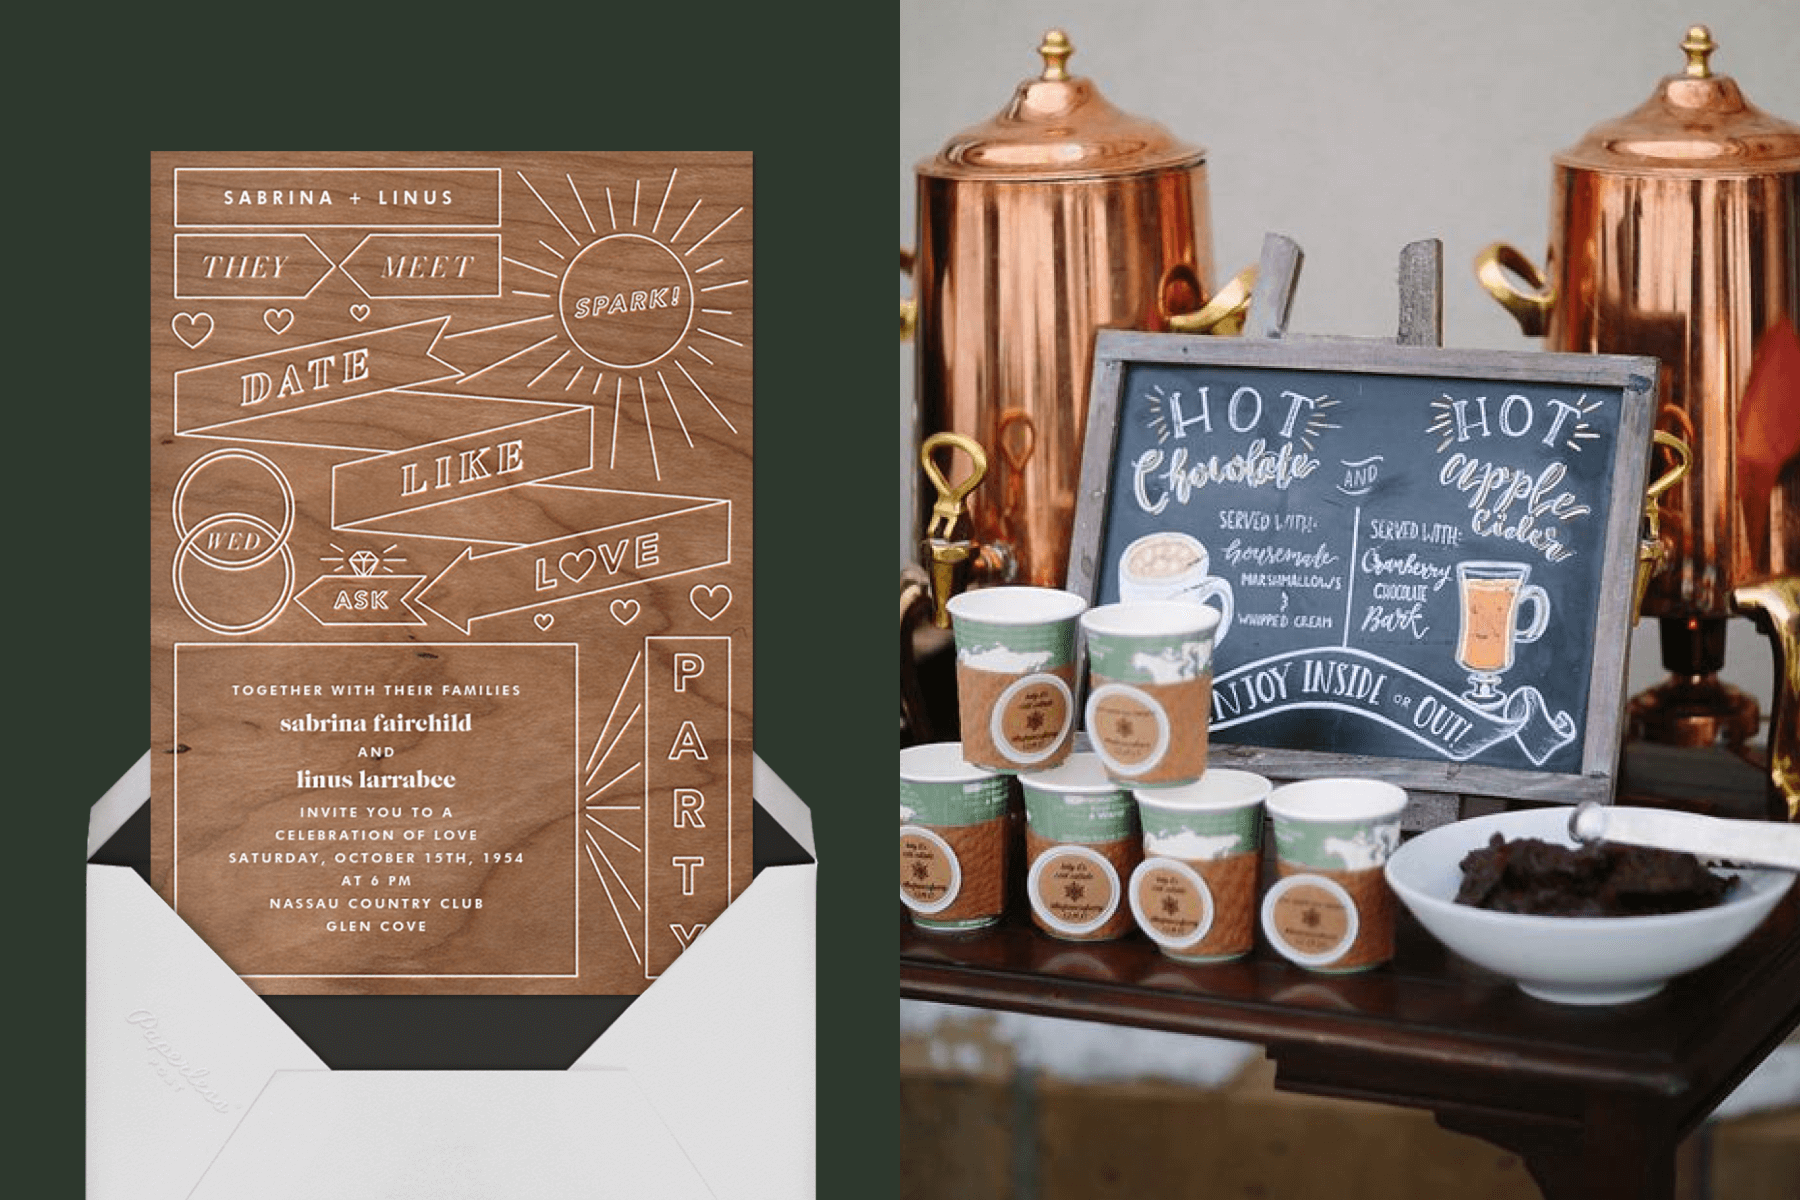 Left: wood grain wedding invitation with etched details. Right: hot chocolate bar with a chalkboard and copper drink dispensers